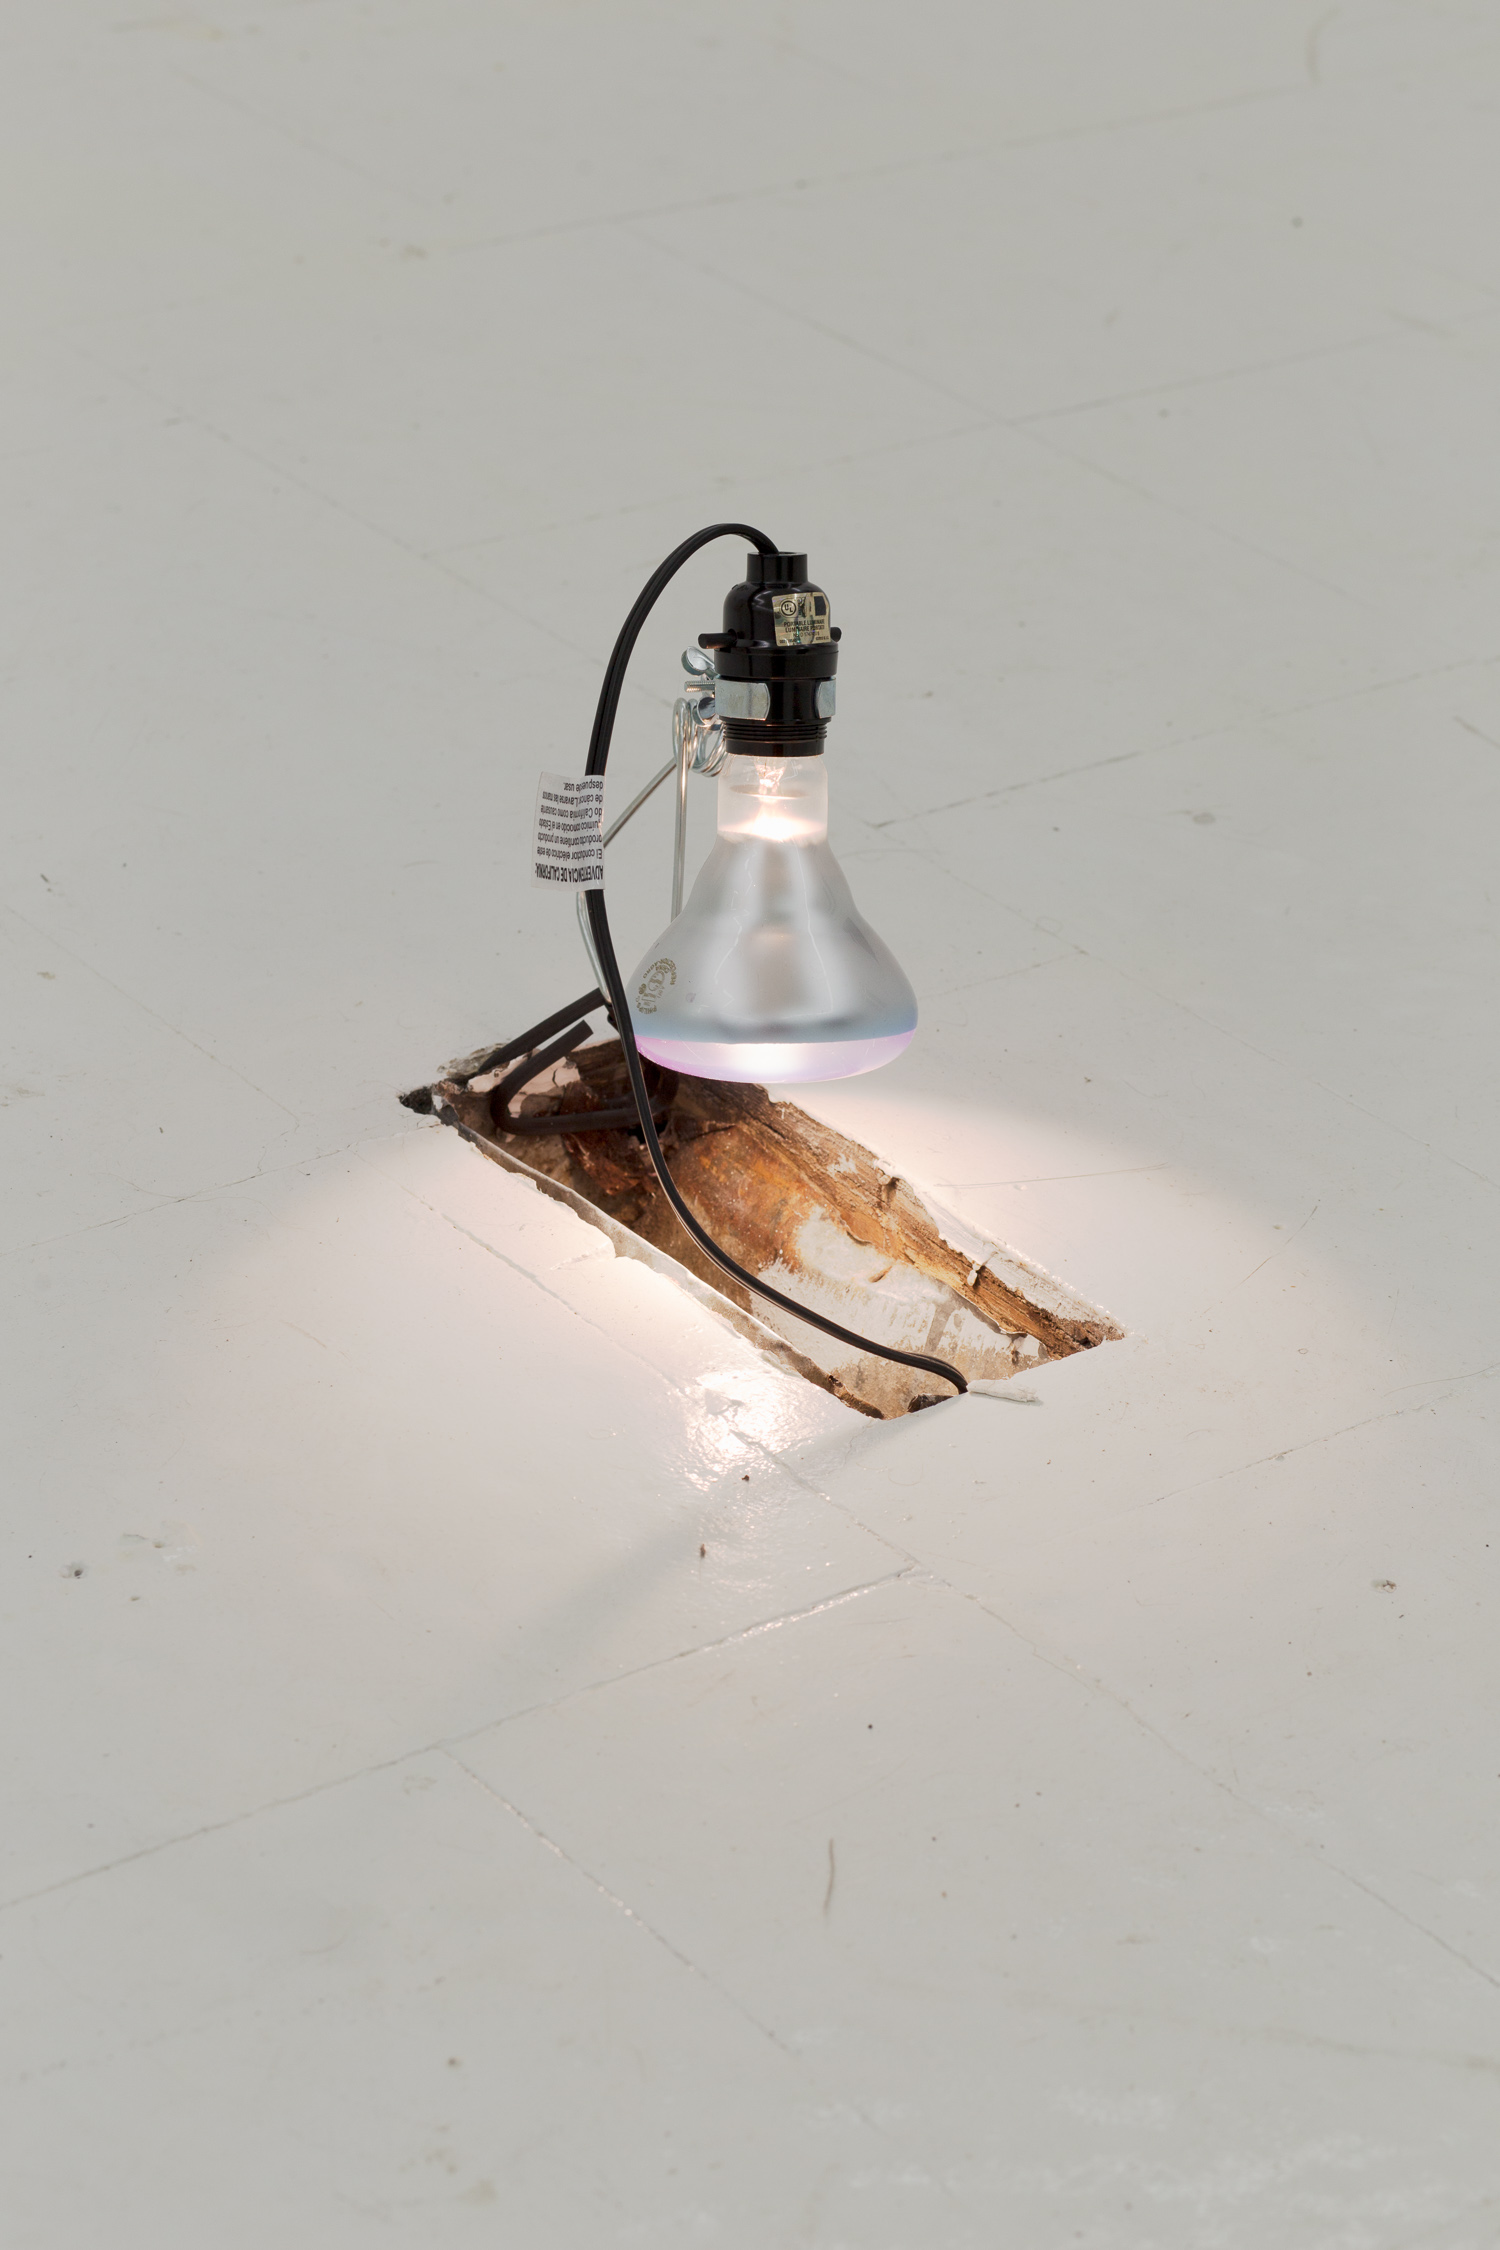 An A/C vent in the floor is illuminated by a clamp light